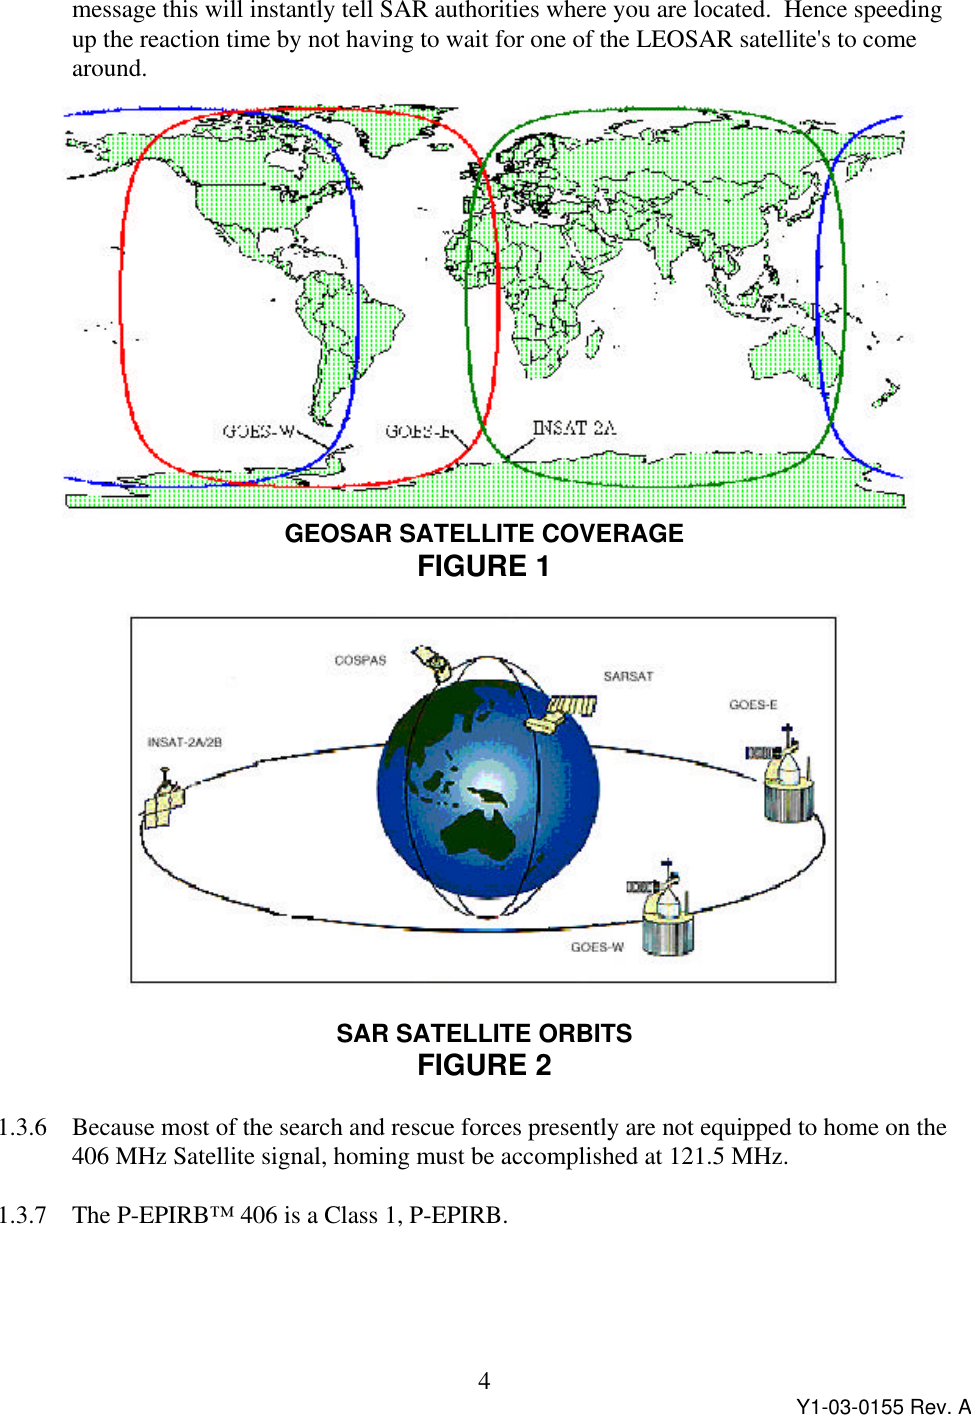 Y1-03-0155 Rev. A4message this will instantly tell SAR authorities where you are located.  Hence speedingup the reaction time by not having to wait for one of the LEOSAR satellite&apos;s to comearound.GEOSAR SATELLITE COVERAGEFIGURE 1SAR SATELLITE ORBITSFIGURE 21.3.6 Because most of the search and rescue forces presently are not equipped to home on the406 MHz Satellite signal, homing must be accomplished at 121.5 MHz.1.3.7 The P-EPIRB™ 406 is a Class 1, P-EPIRB.